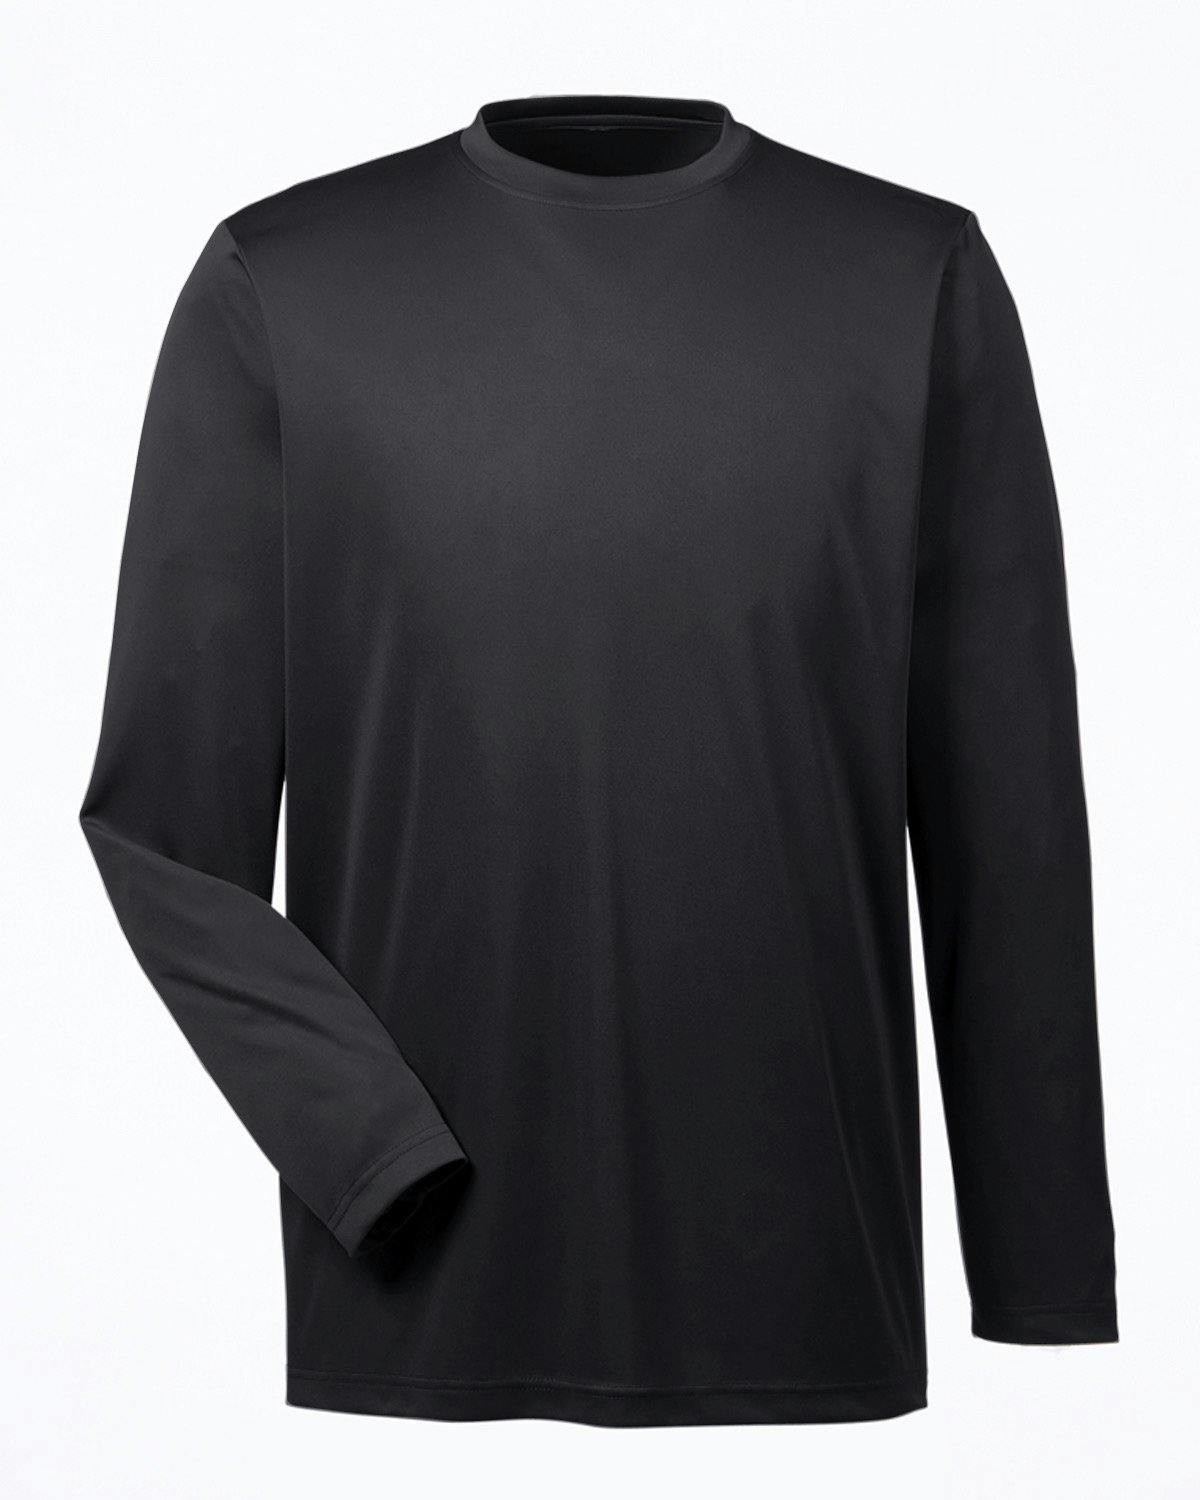 Image for Men's Cool & Dry Performance Long-Sleeve Top